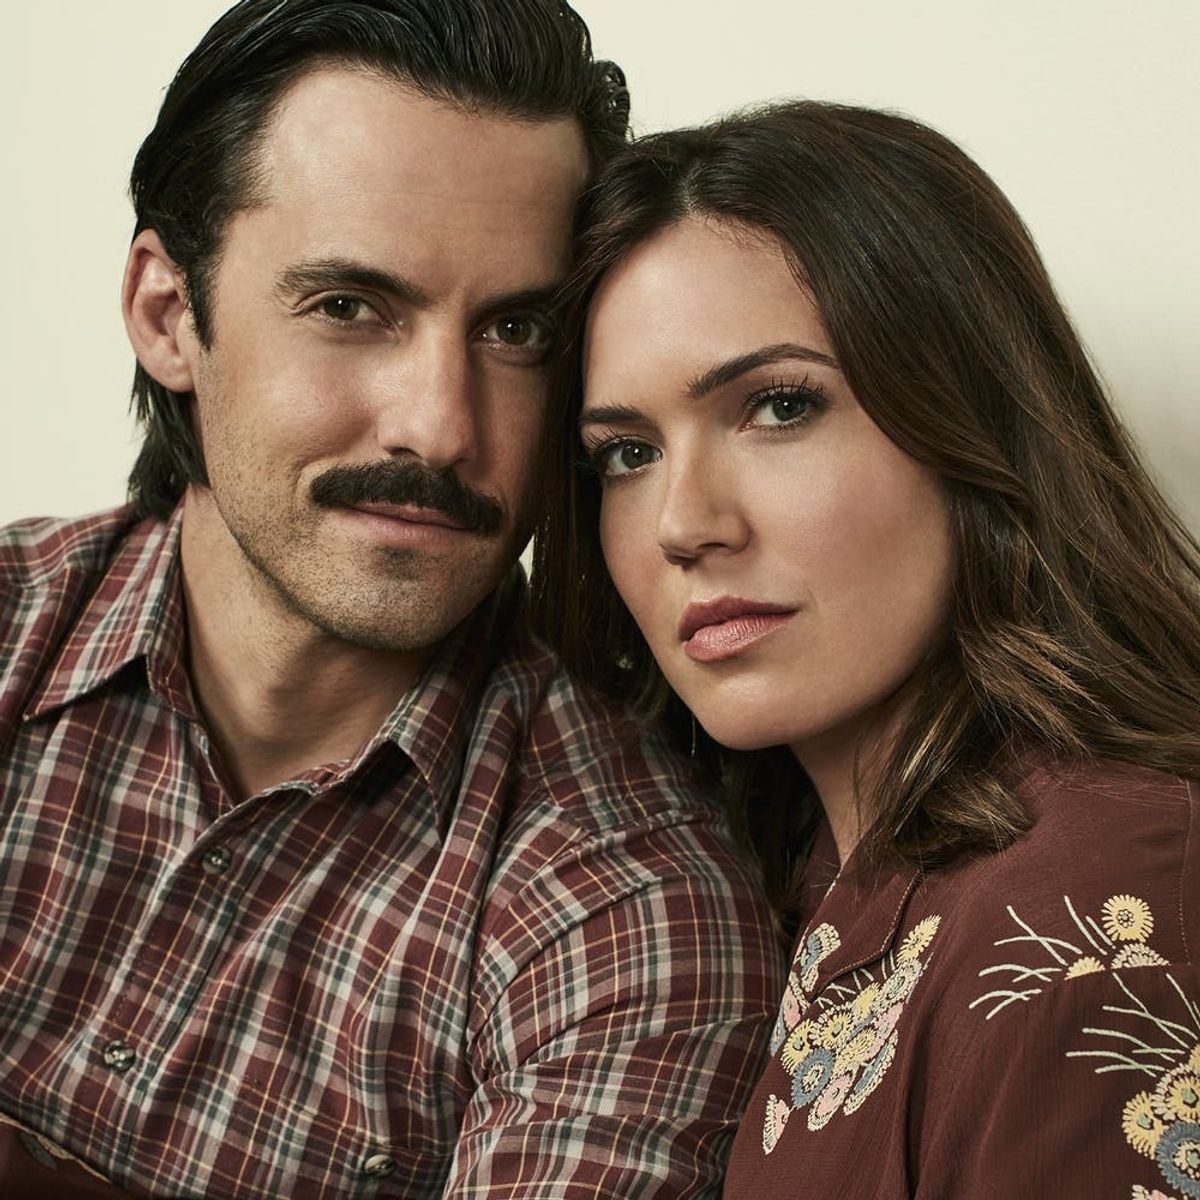 People Are Trying to Take the Day Off of Work After Jack’s Death on ‘This Is Us’ 